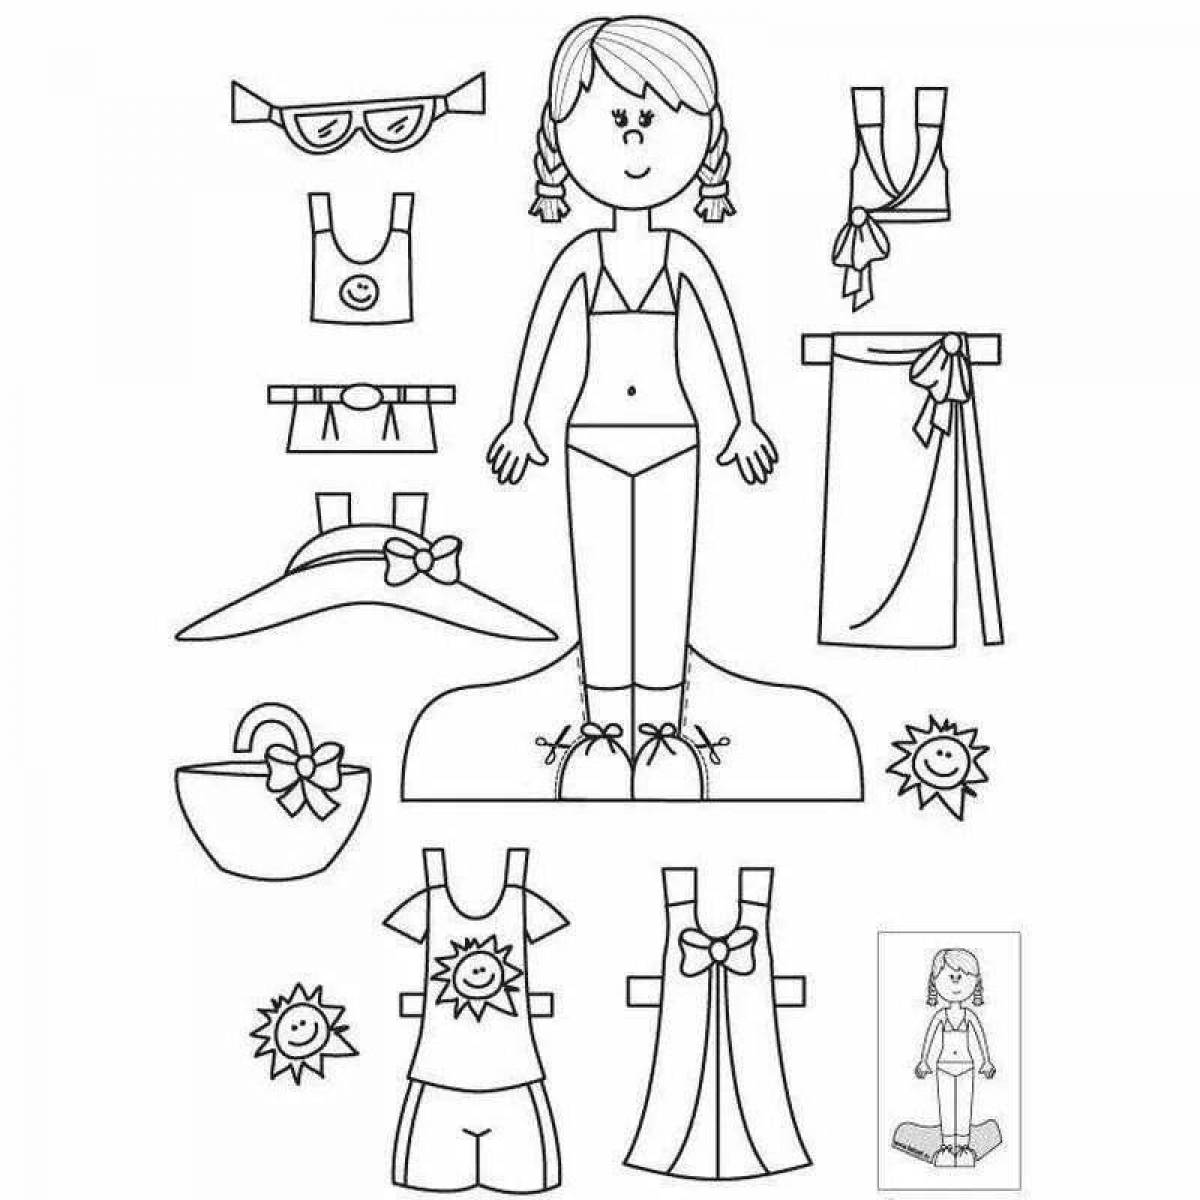 Paper dolls with clothes for carving girl #3